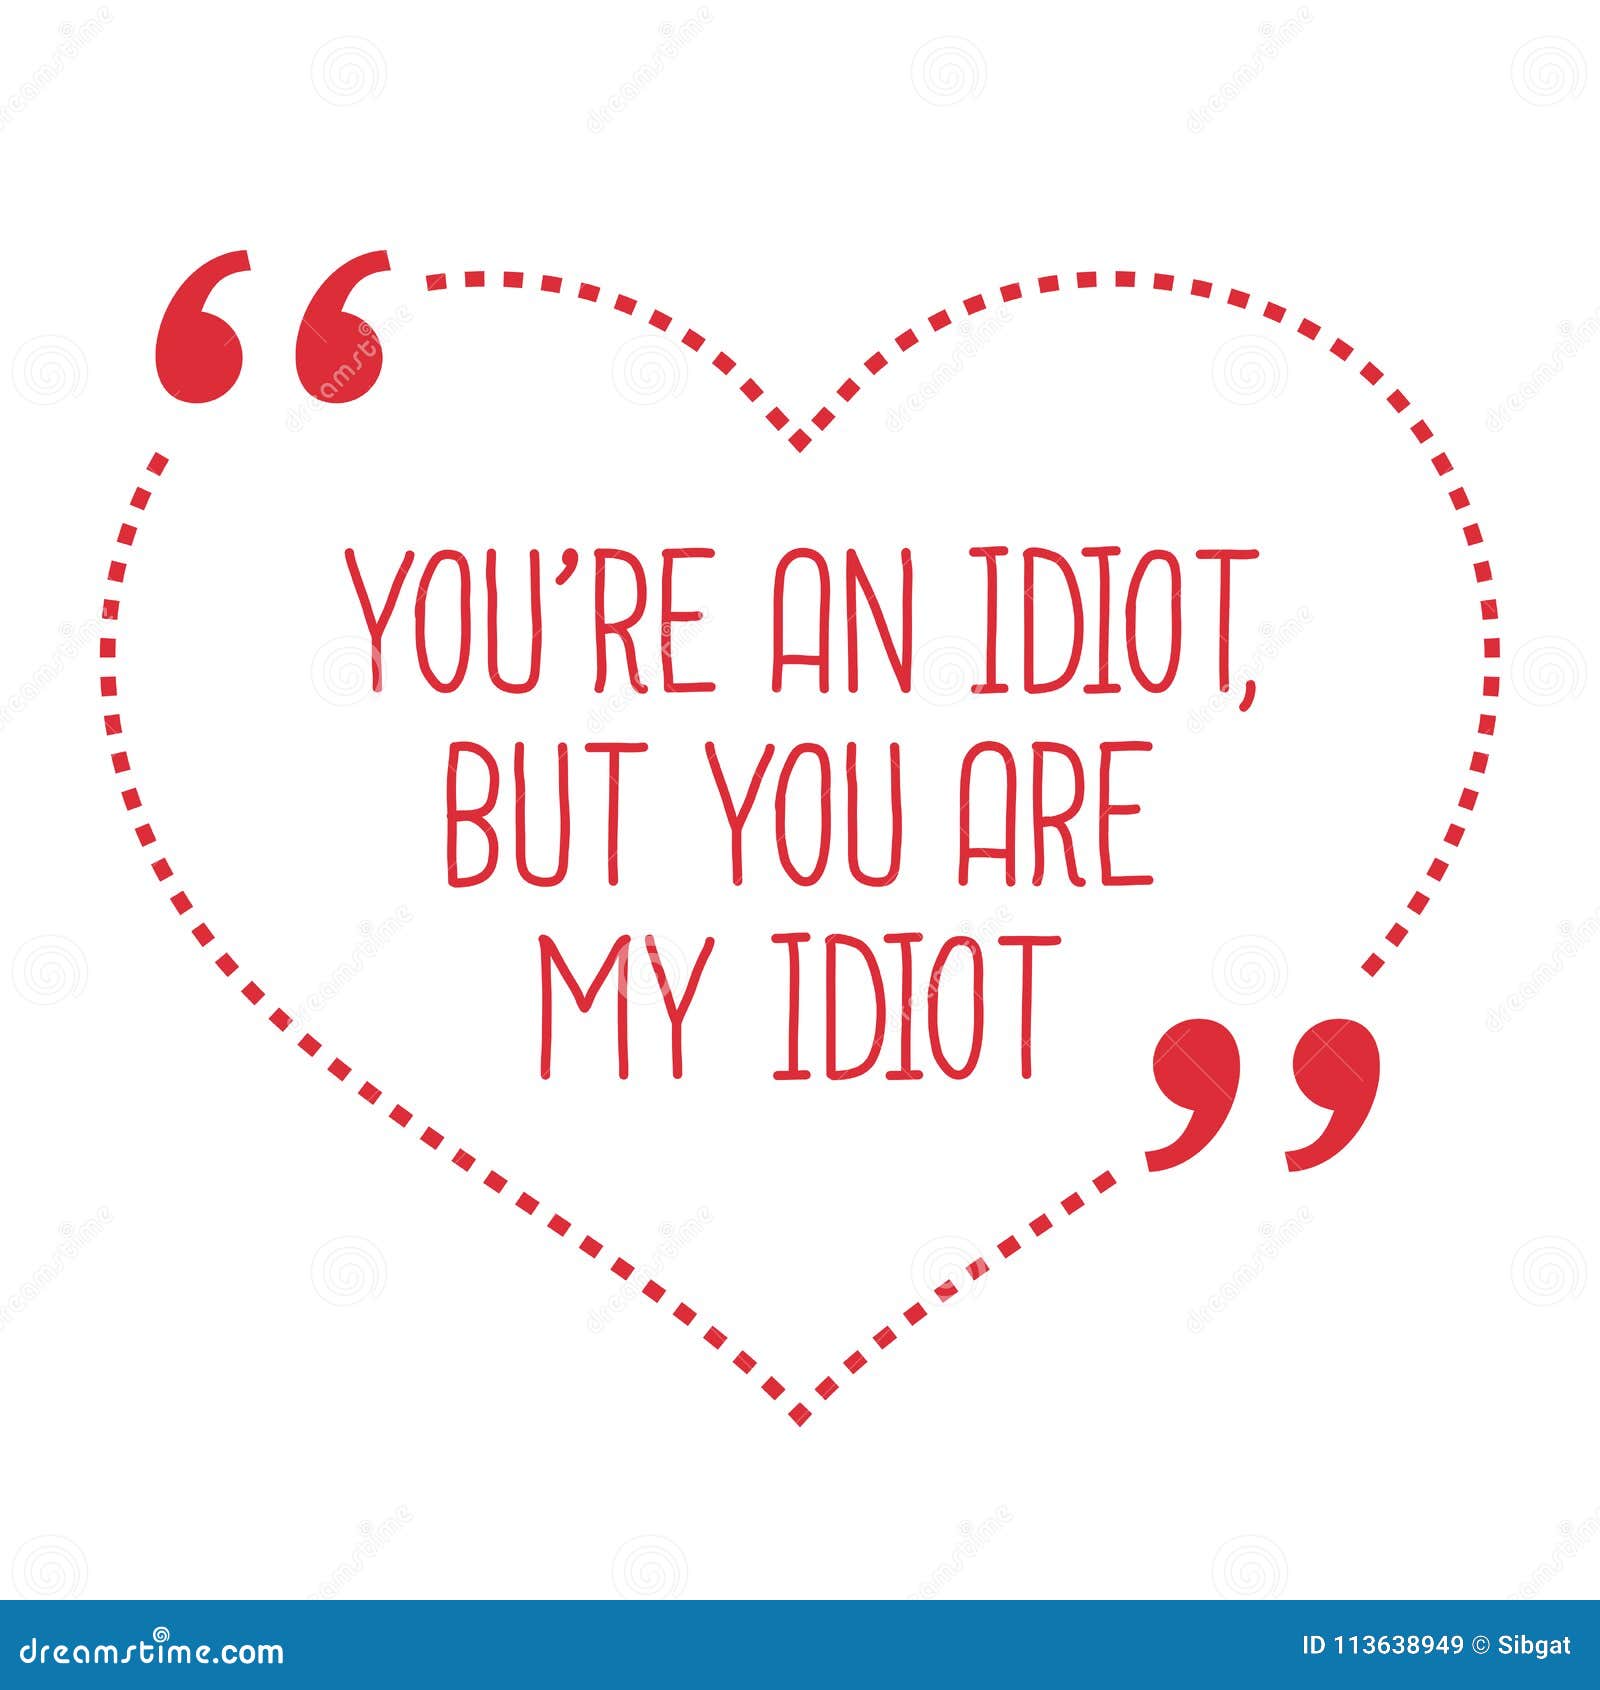 New you are an idiot virus Quotes, Status, Photo, Video